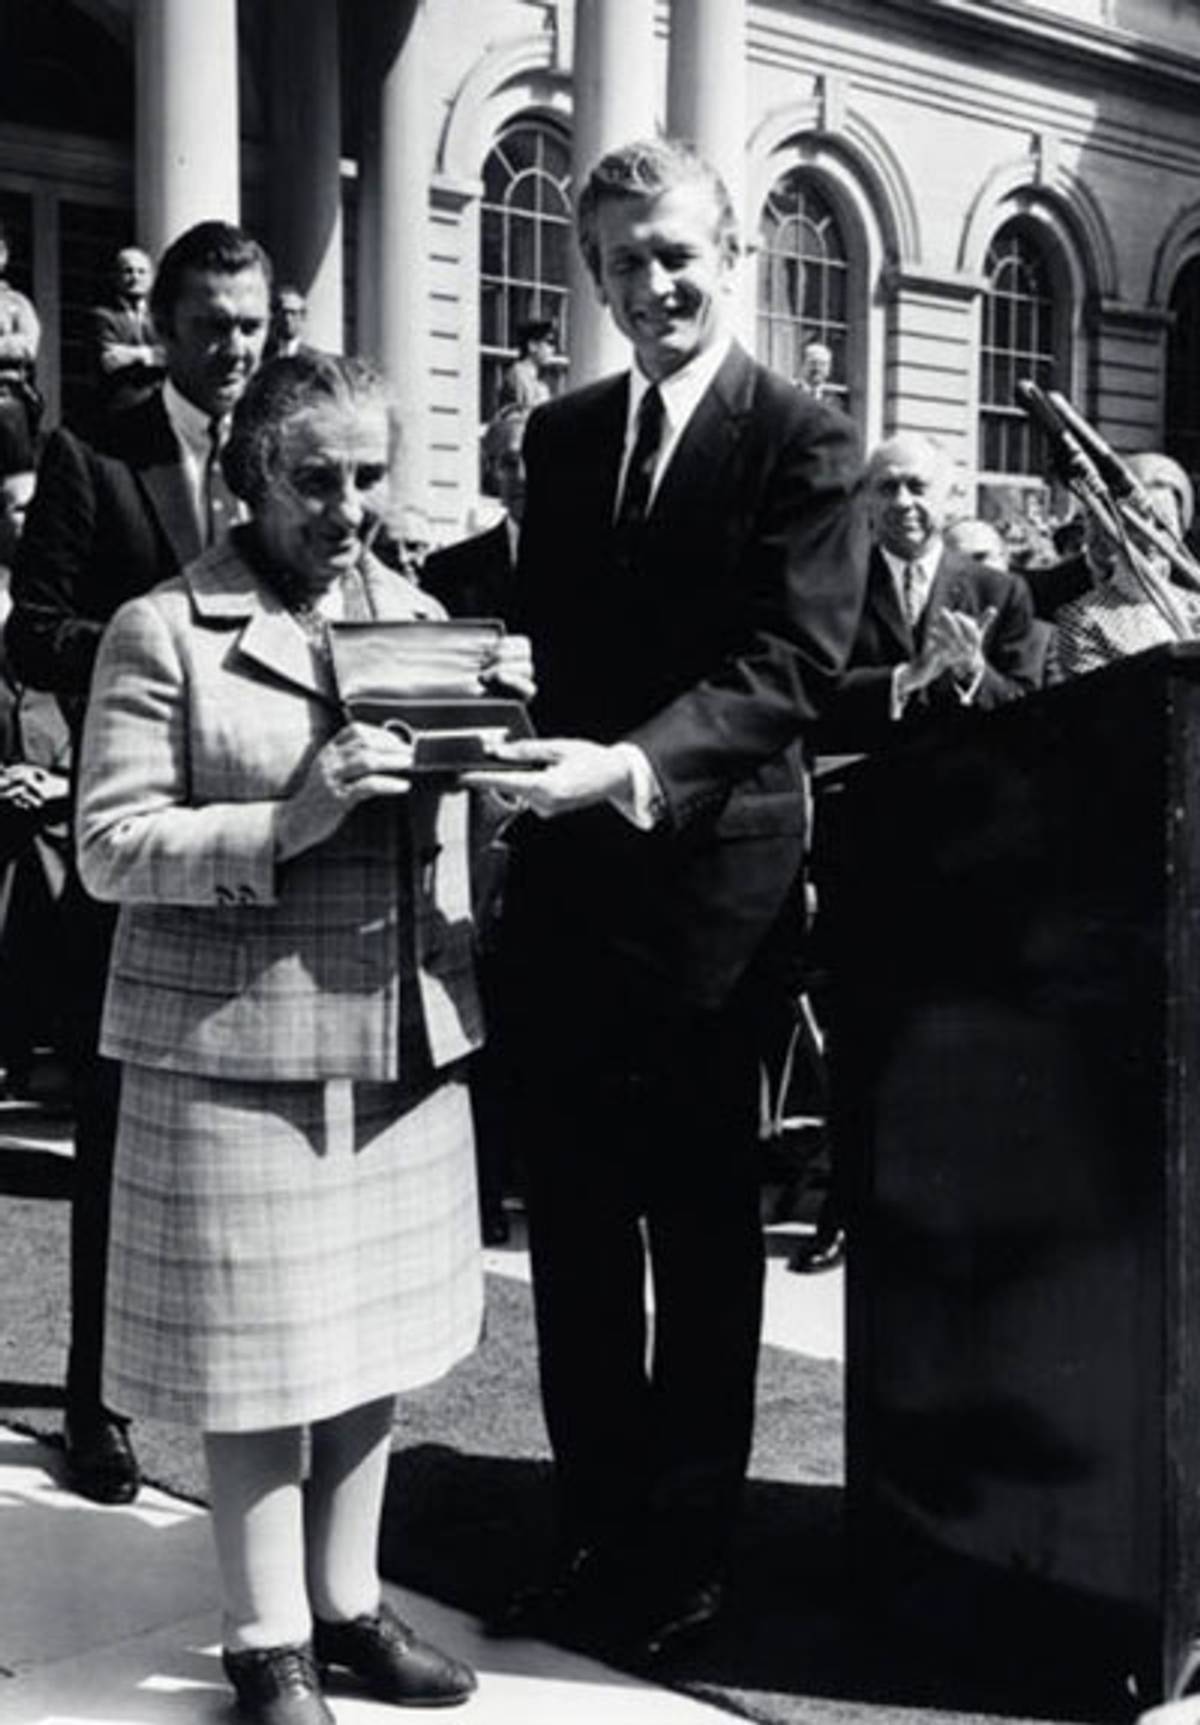 Golda Meir receiving the key to the city from John V. Lindsay, 1969.(Golda Meir Collection 1904-1987/University of Wisconsin-Milwaukee Libraries)